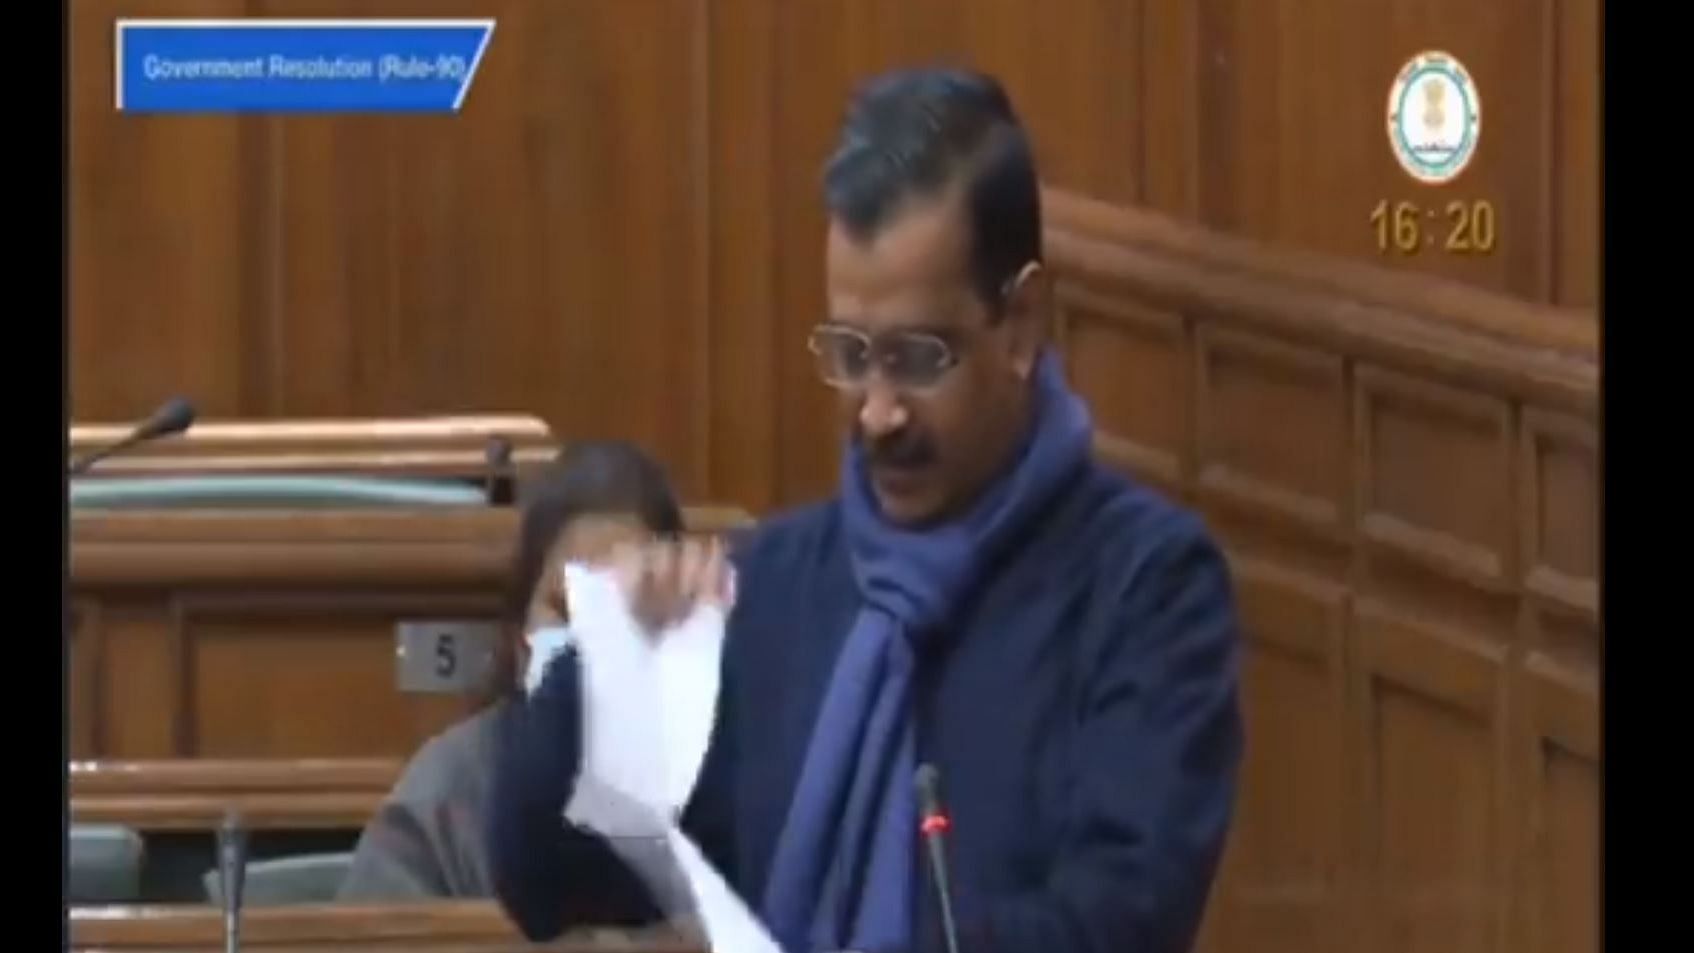 “Twenty protesting farmers have died so far... I want to ask the Centre, when will it wake up?” Kejriwal said.